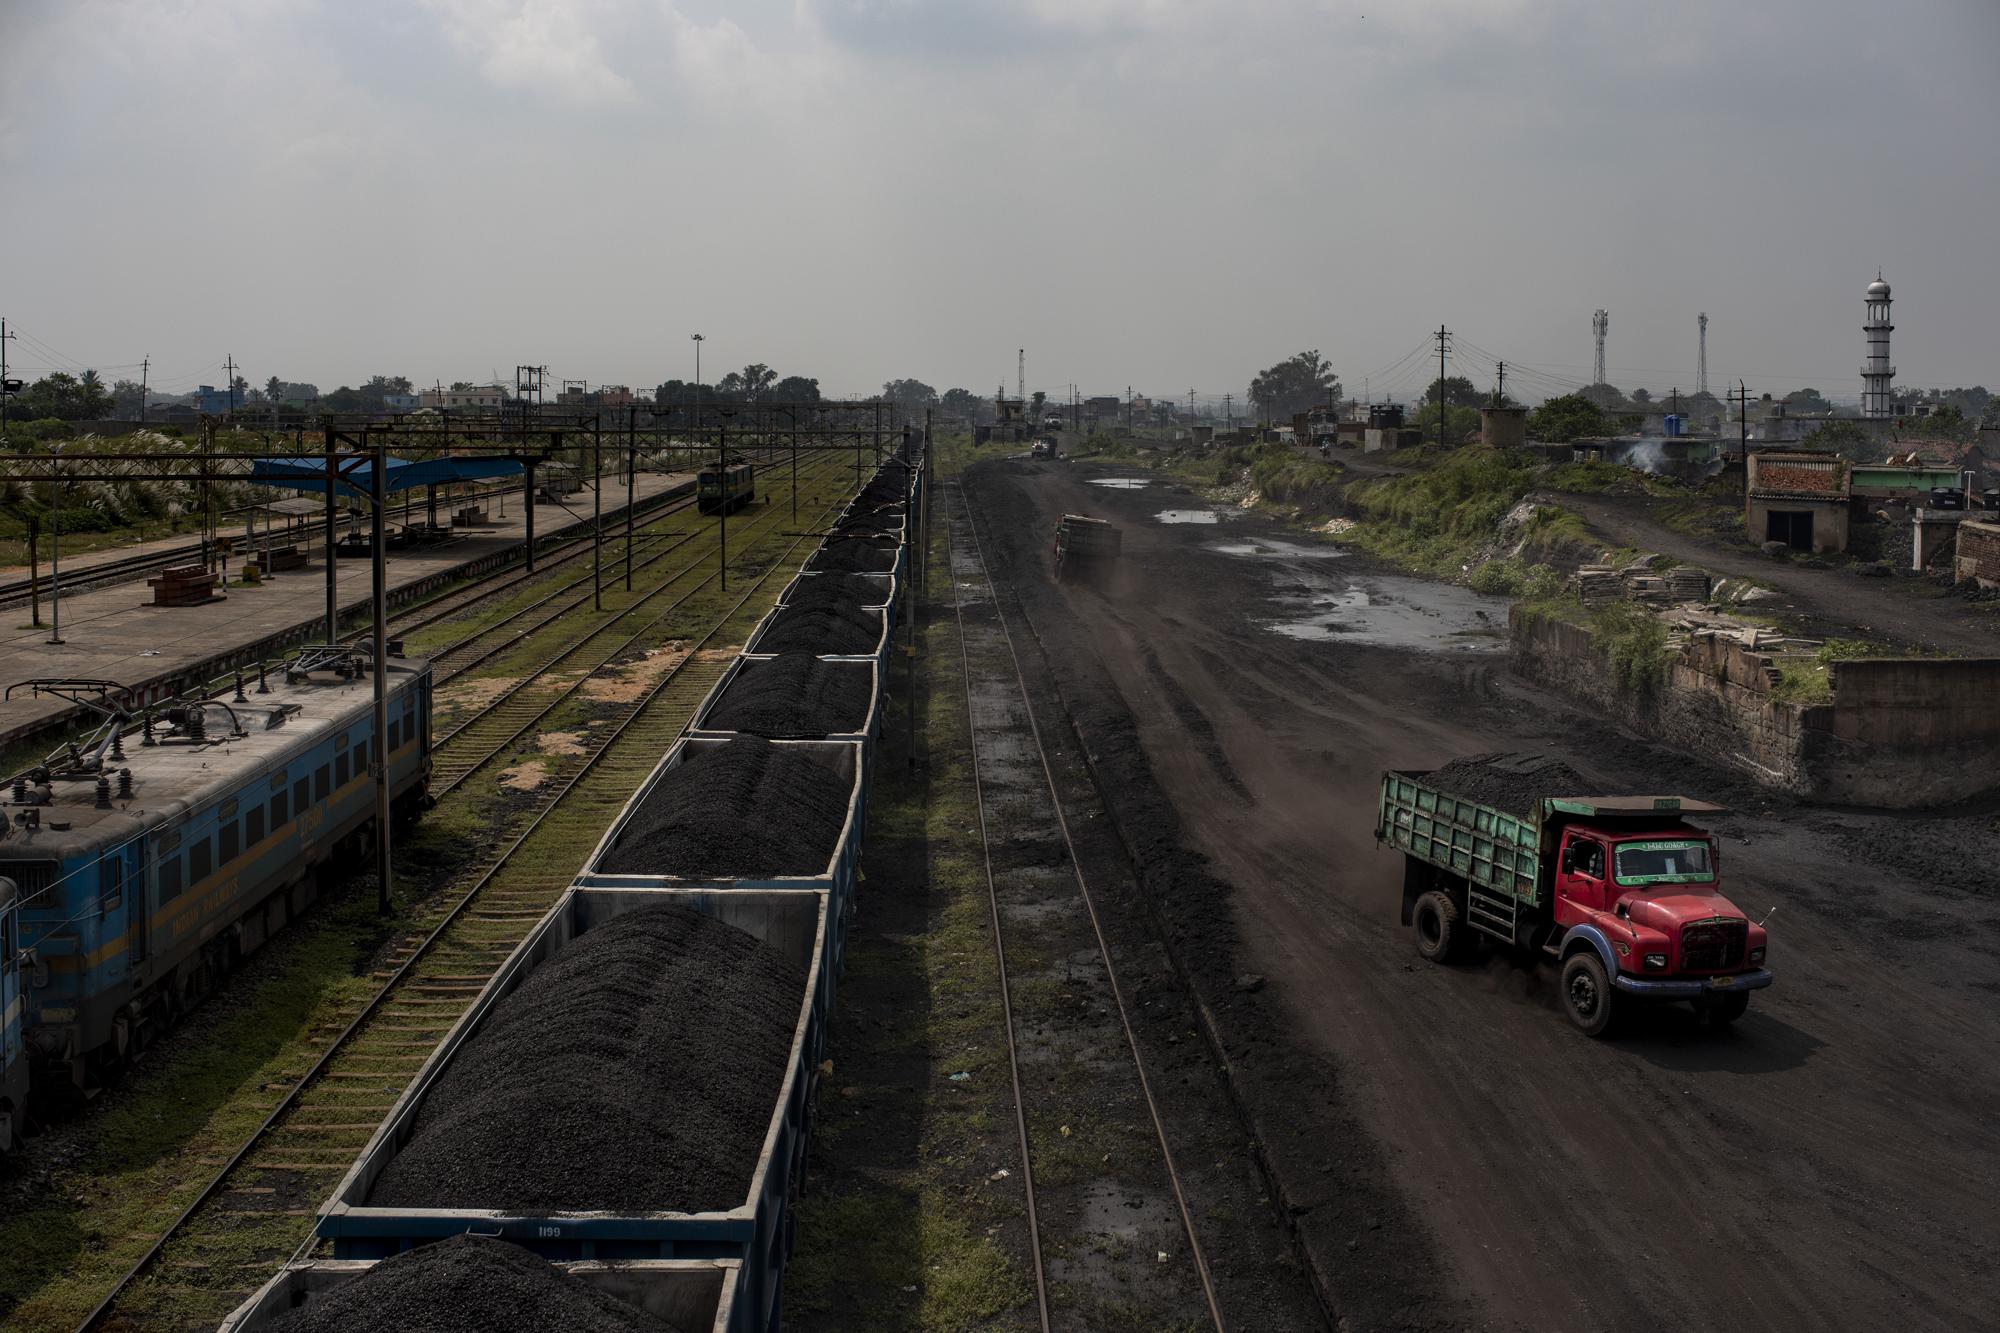 A truck loaded with coal drives past a stationary freight train carrying coal at Chainpur village near Hazaribagh, in eastern state of Jharkhand, Sunday, Sept. 26, 2021. A 2021 Indian government study found that Jharkhand state -- among the poorest in India and the state with the nation’s largest coal reserves -- is also the most vulnerable Indian state to climate change. Efforts to fight climate change are being held back in part because coal, the biggest single source of climate-changing gases, provides cheap electricity and supports millions of jobs. It's one of the dilemmas facing world leaders gathered in Glasgow, Scotland this week in an attempt to stave off the worst effects of climate change. (AP Photo/Altaf Qadri)